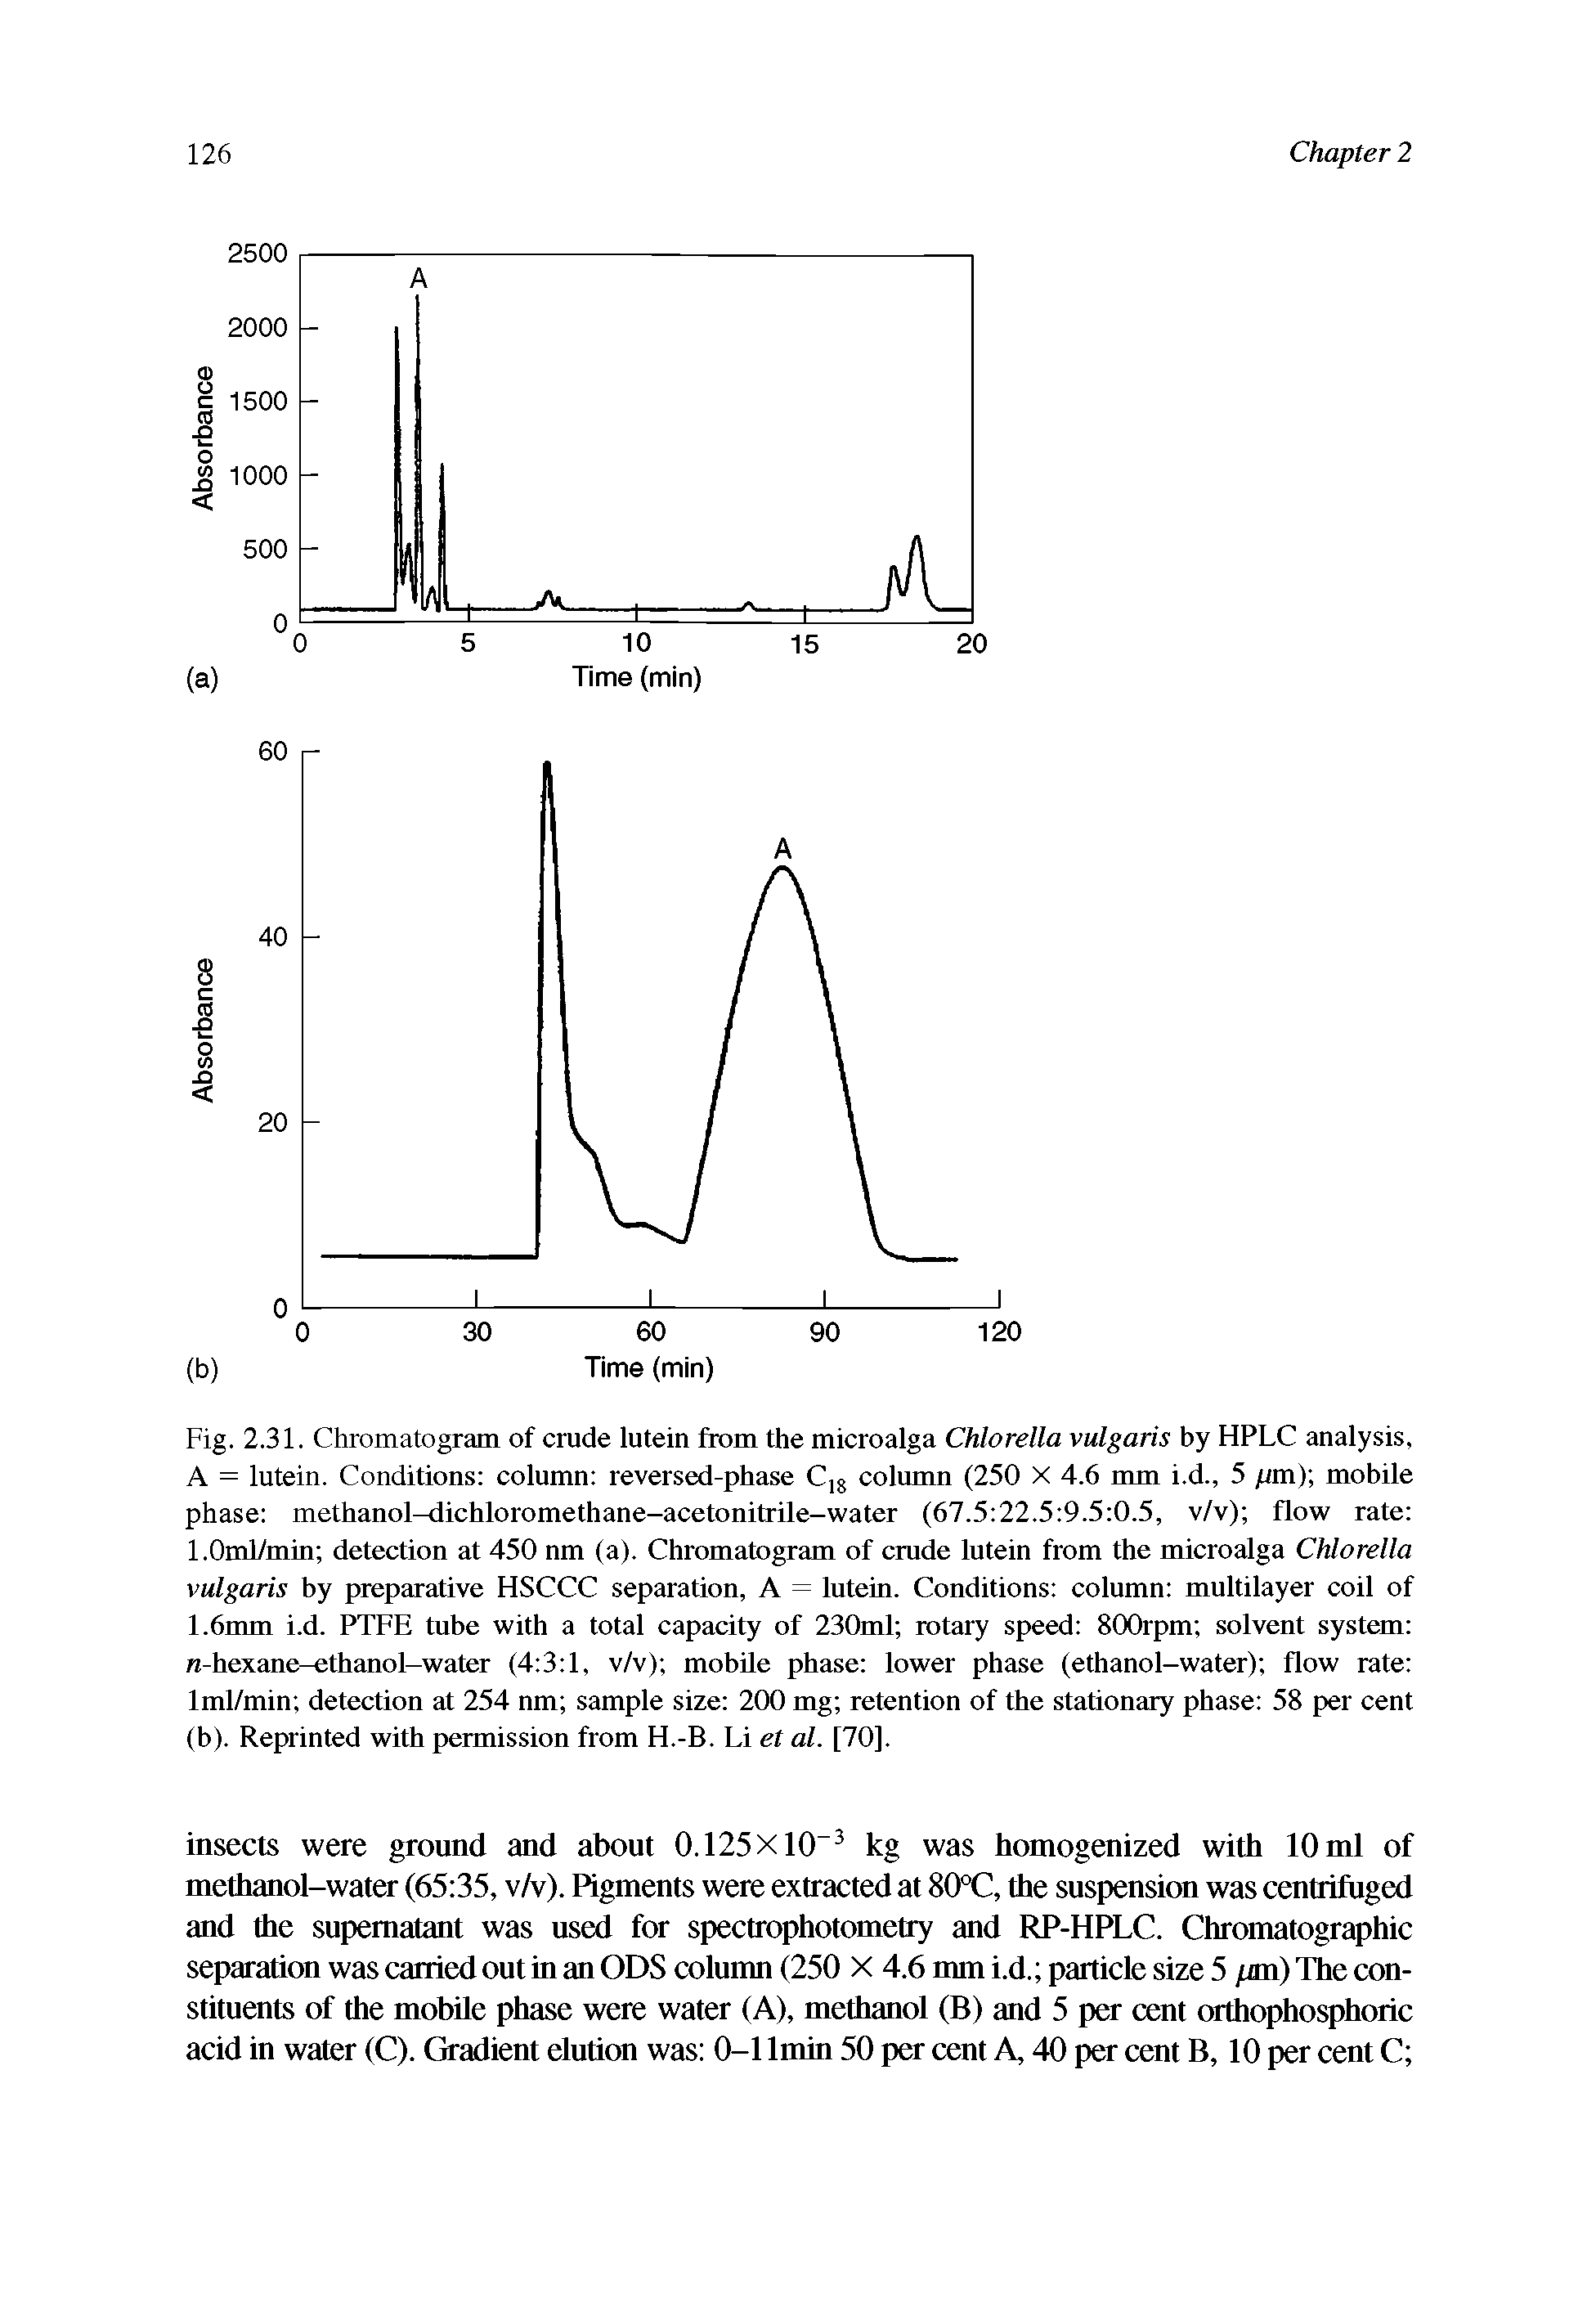 Fig. 2.31. Chromatogram of crude lutein from the microalga Chlorella vulgaris by HPLC analysis, A = lutein. Conditions column reversed-phase C18 column (250 X 4.6 mm i.d., 5 pm) mobile phase methanol-dichloromethane-acetonitrile-water (67.5 22.5 9.5 0.5, v/v) flow rate l.Oml/min detection at 450 nm (a). Chromatogram of crude lutein from the microalga Chlorella vulgaris by preparative HSCCC separation, A = lutein. Conditions column multilayer coil of 1.6mm i.d. PTFE tube with a total capacity of 230ml rotary speed 800rpm solvent system ra-hexane-ethanol-water (4 3 1, v/v) mobile phase lower phase (ethanol-water) flow rate lml/min detection at 254 nm sample size 200 mg retention of the stationary phase 58 per cent (b). Reprinted with permission from H.-B. Li el al. [70].